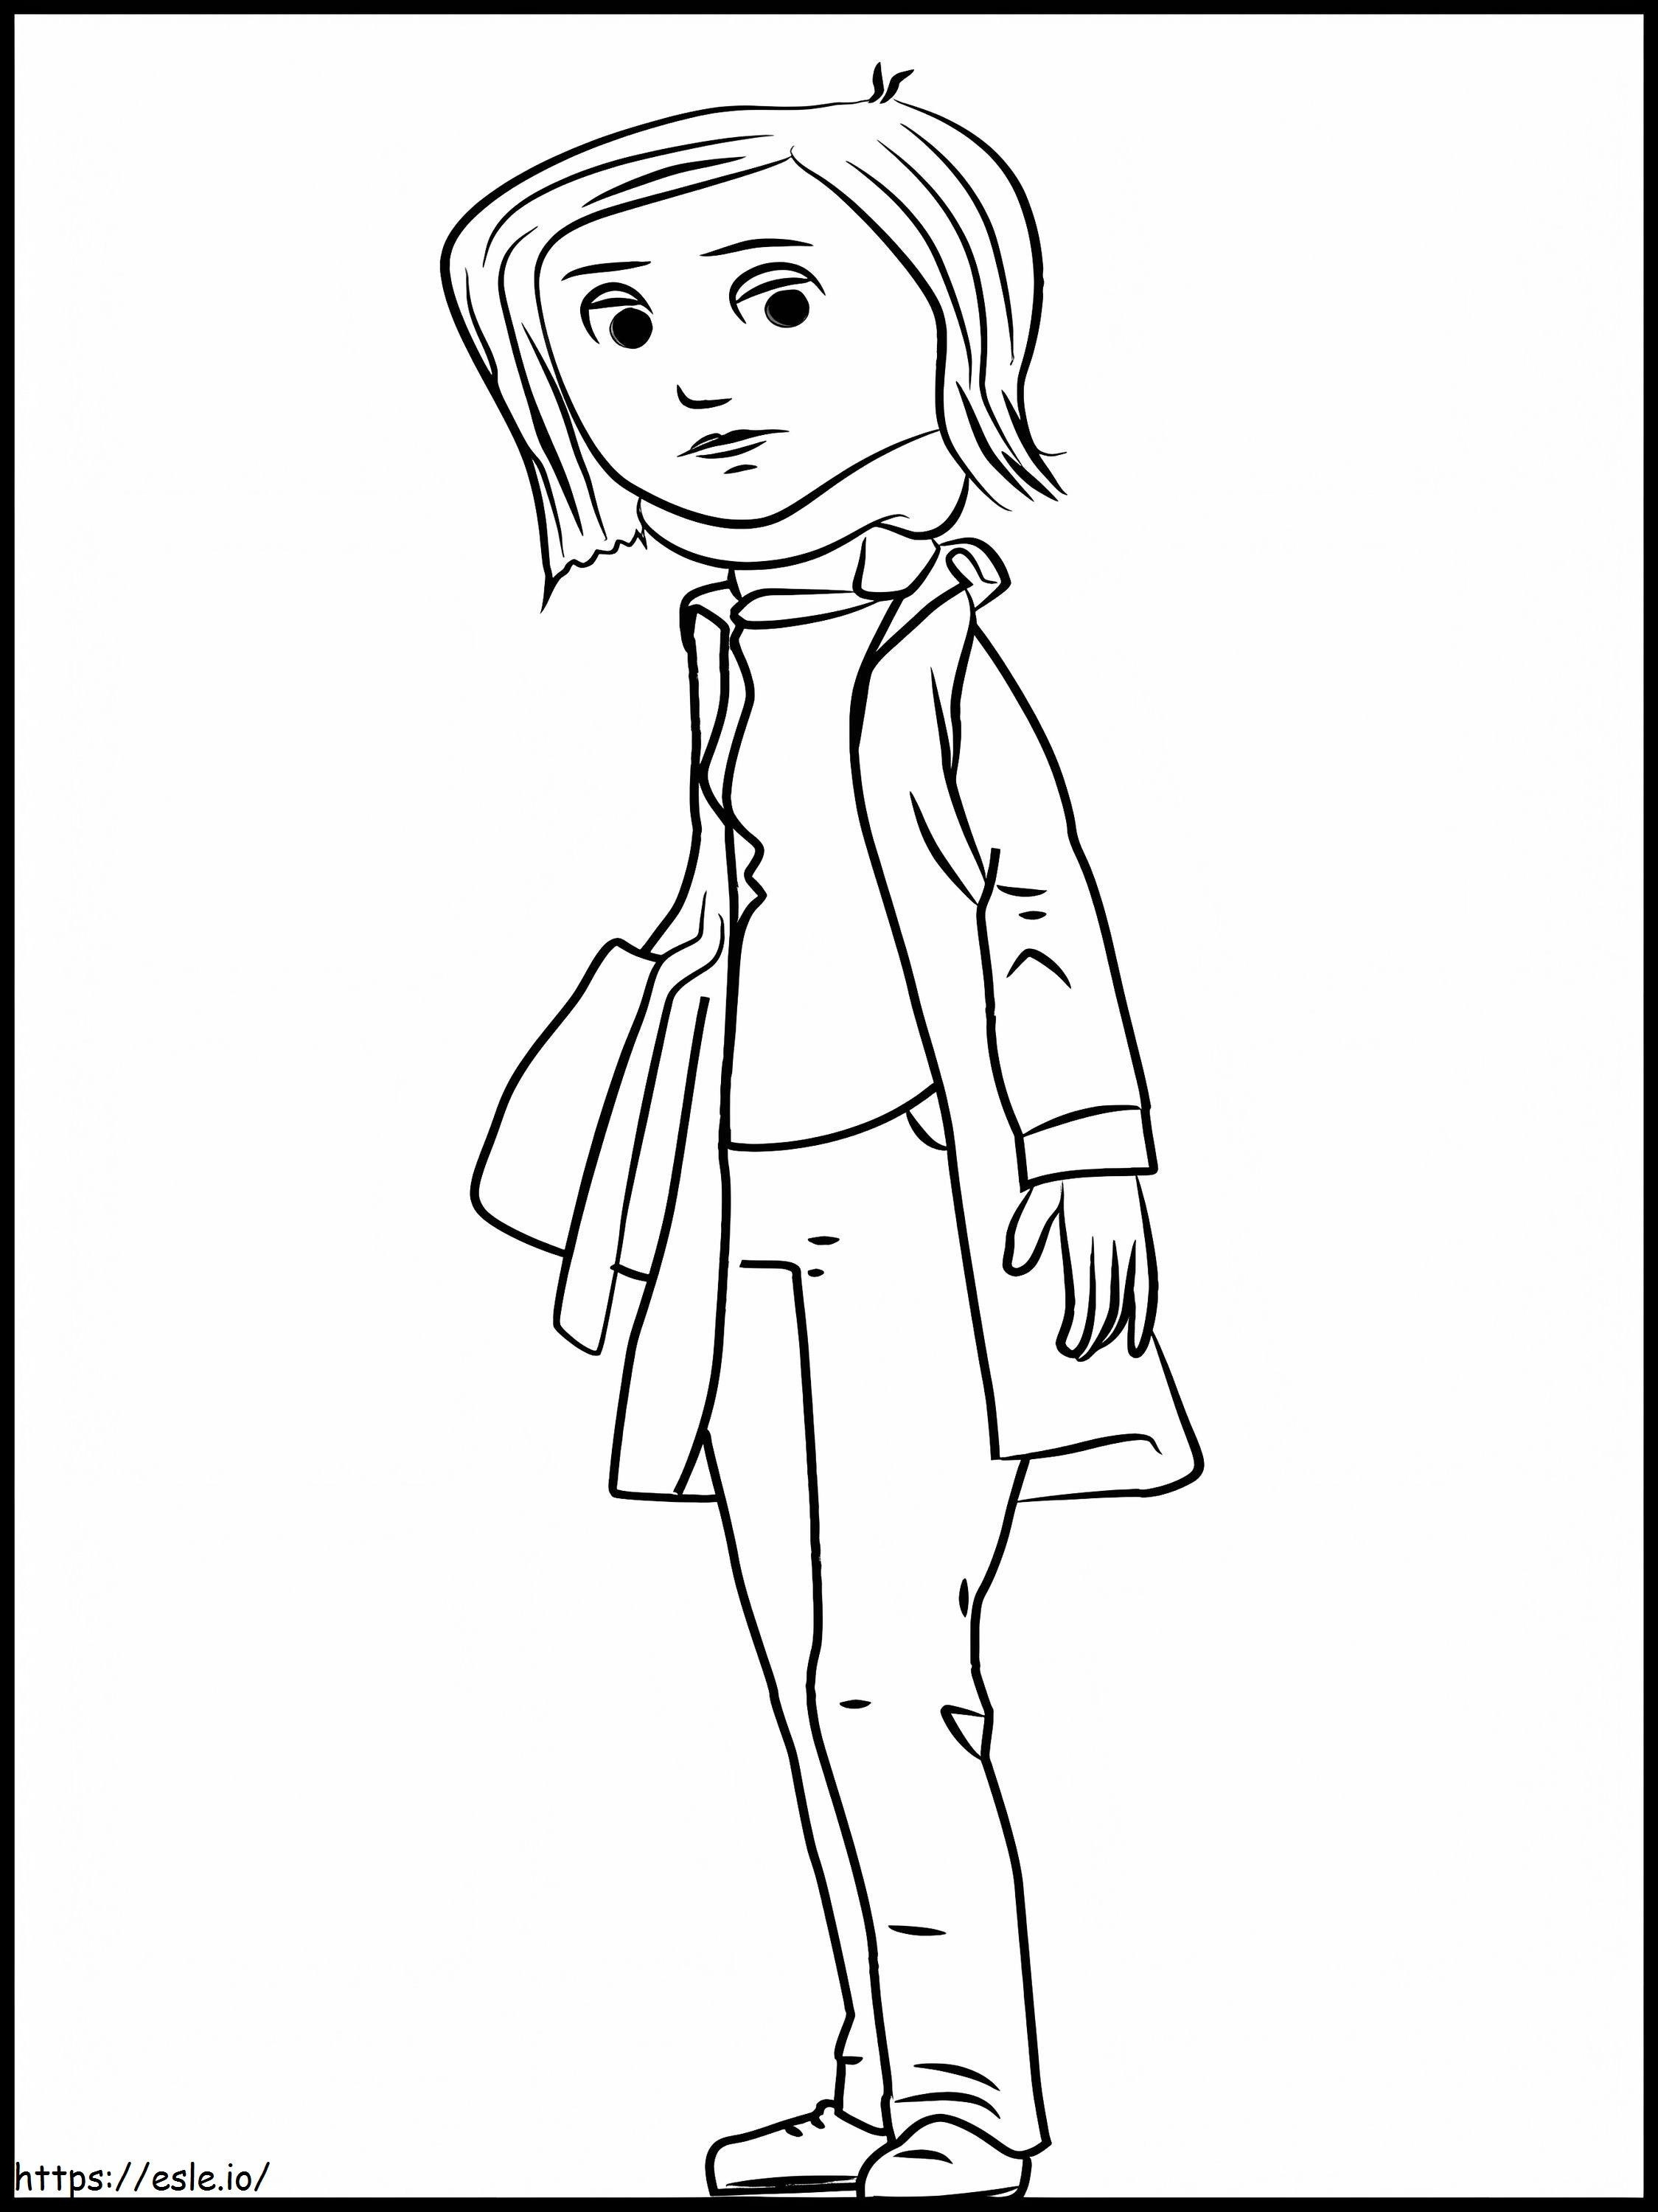 Coraline 4 coloring page